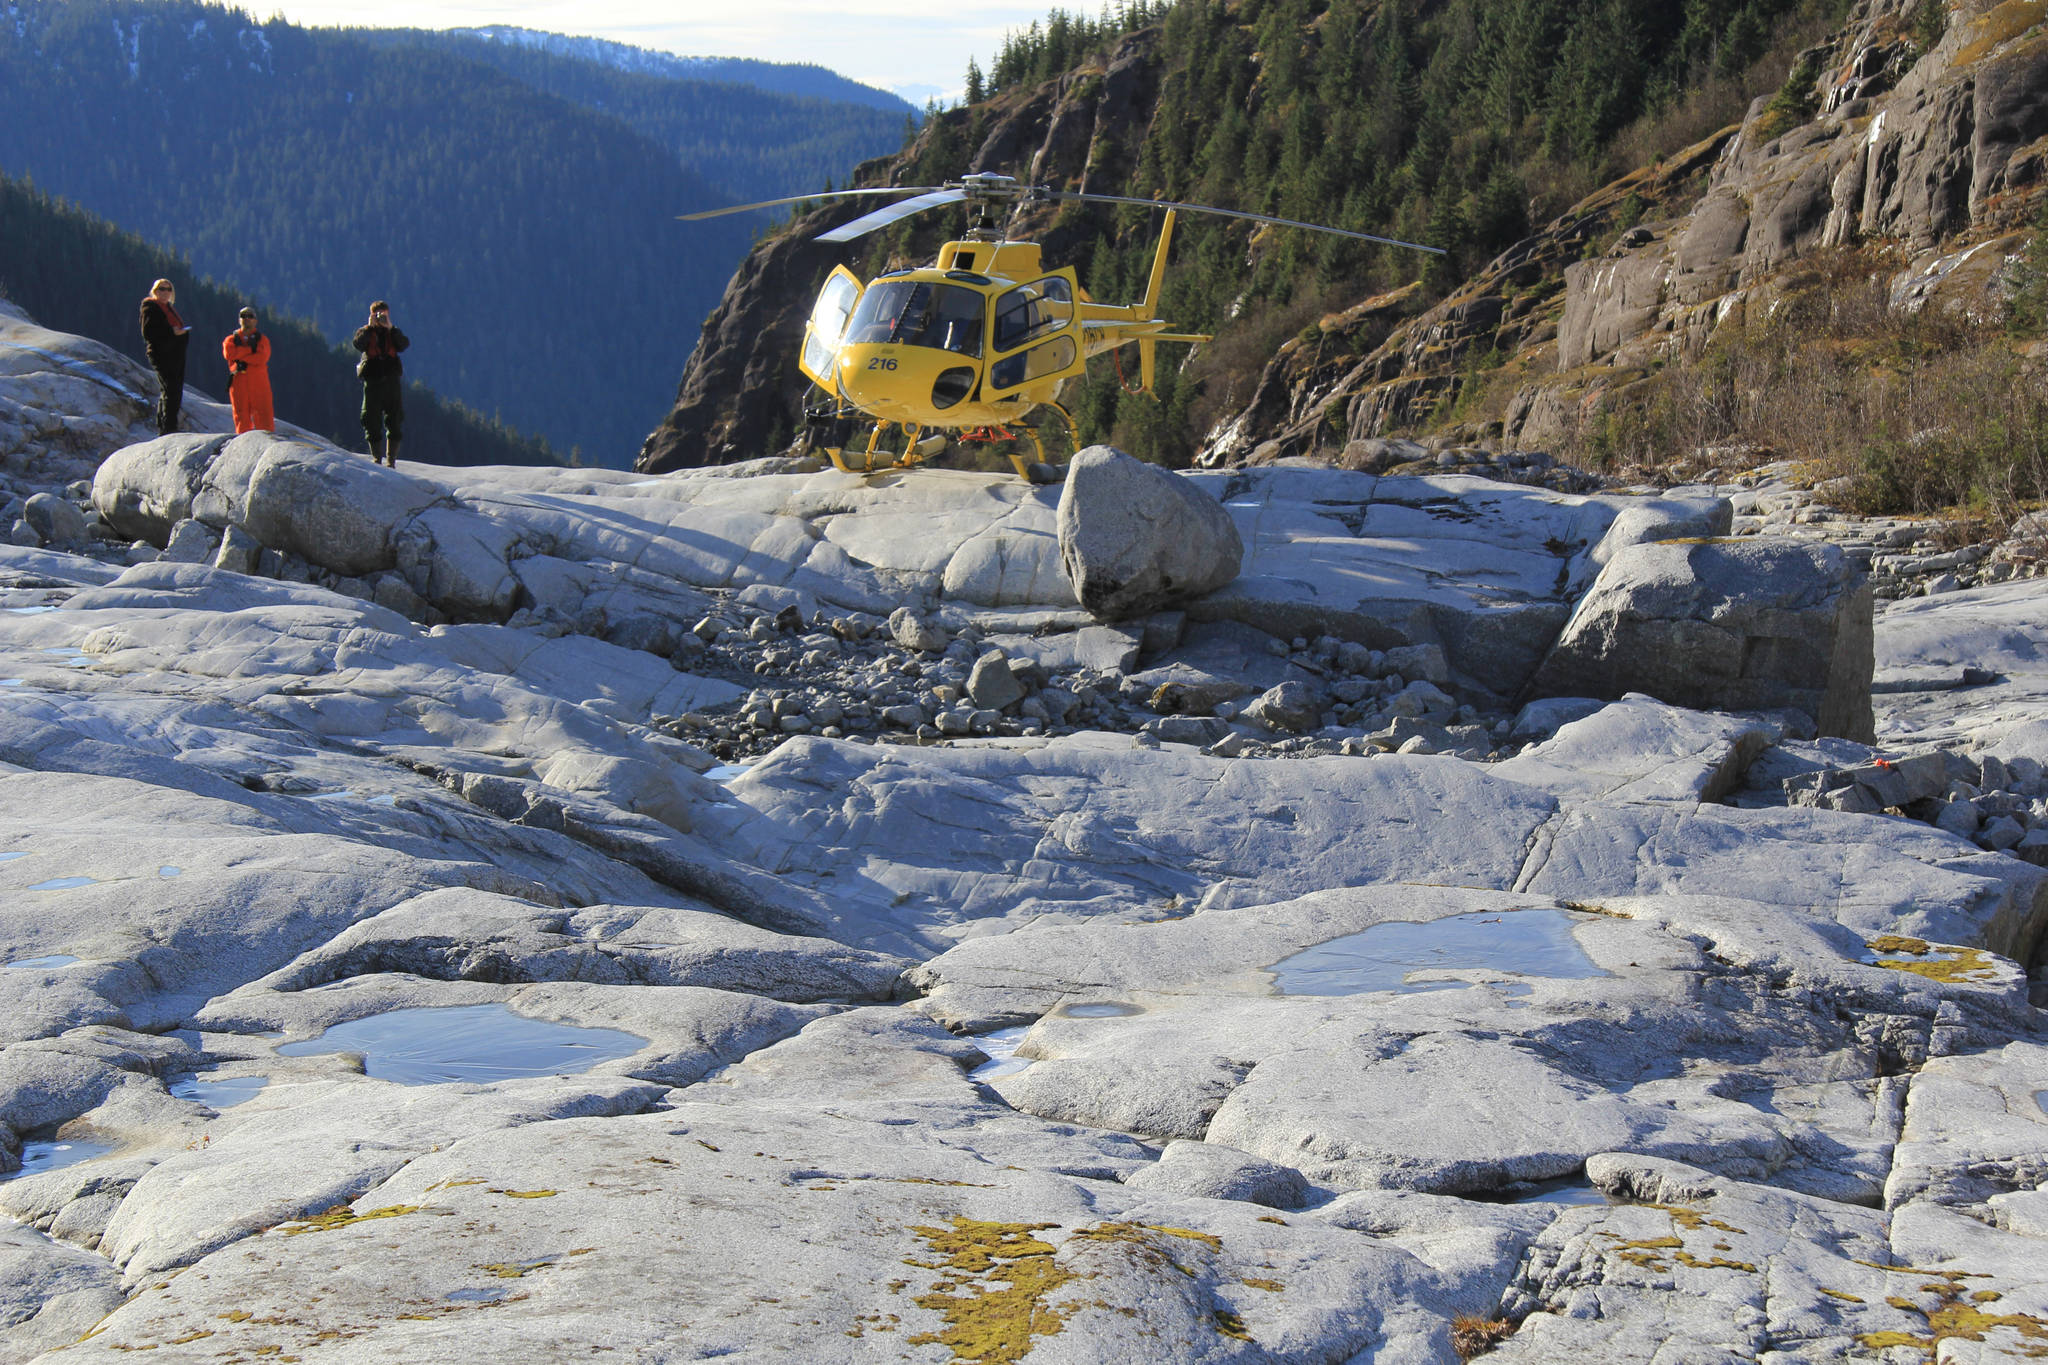 Forest Service Employees inspect the sight of an alpine tsunami on the Cowee Creek Channel. On Dec. 30, 2016, a 30-foot tall tsunami scoured the creek’s shoreline, exposing the grey rock in the foreground. (Photo courtesy the U.S. Forest Service and Rick Edwards)